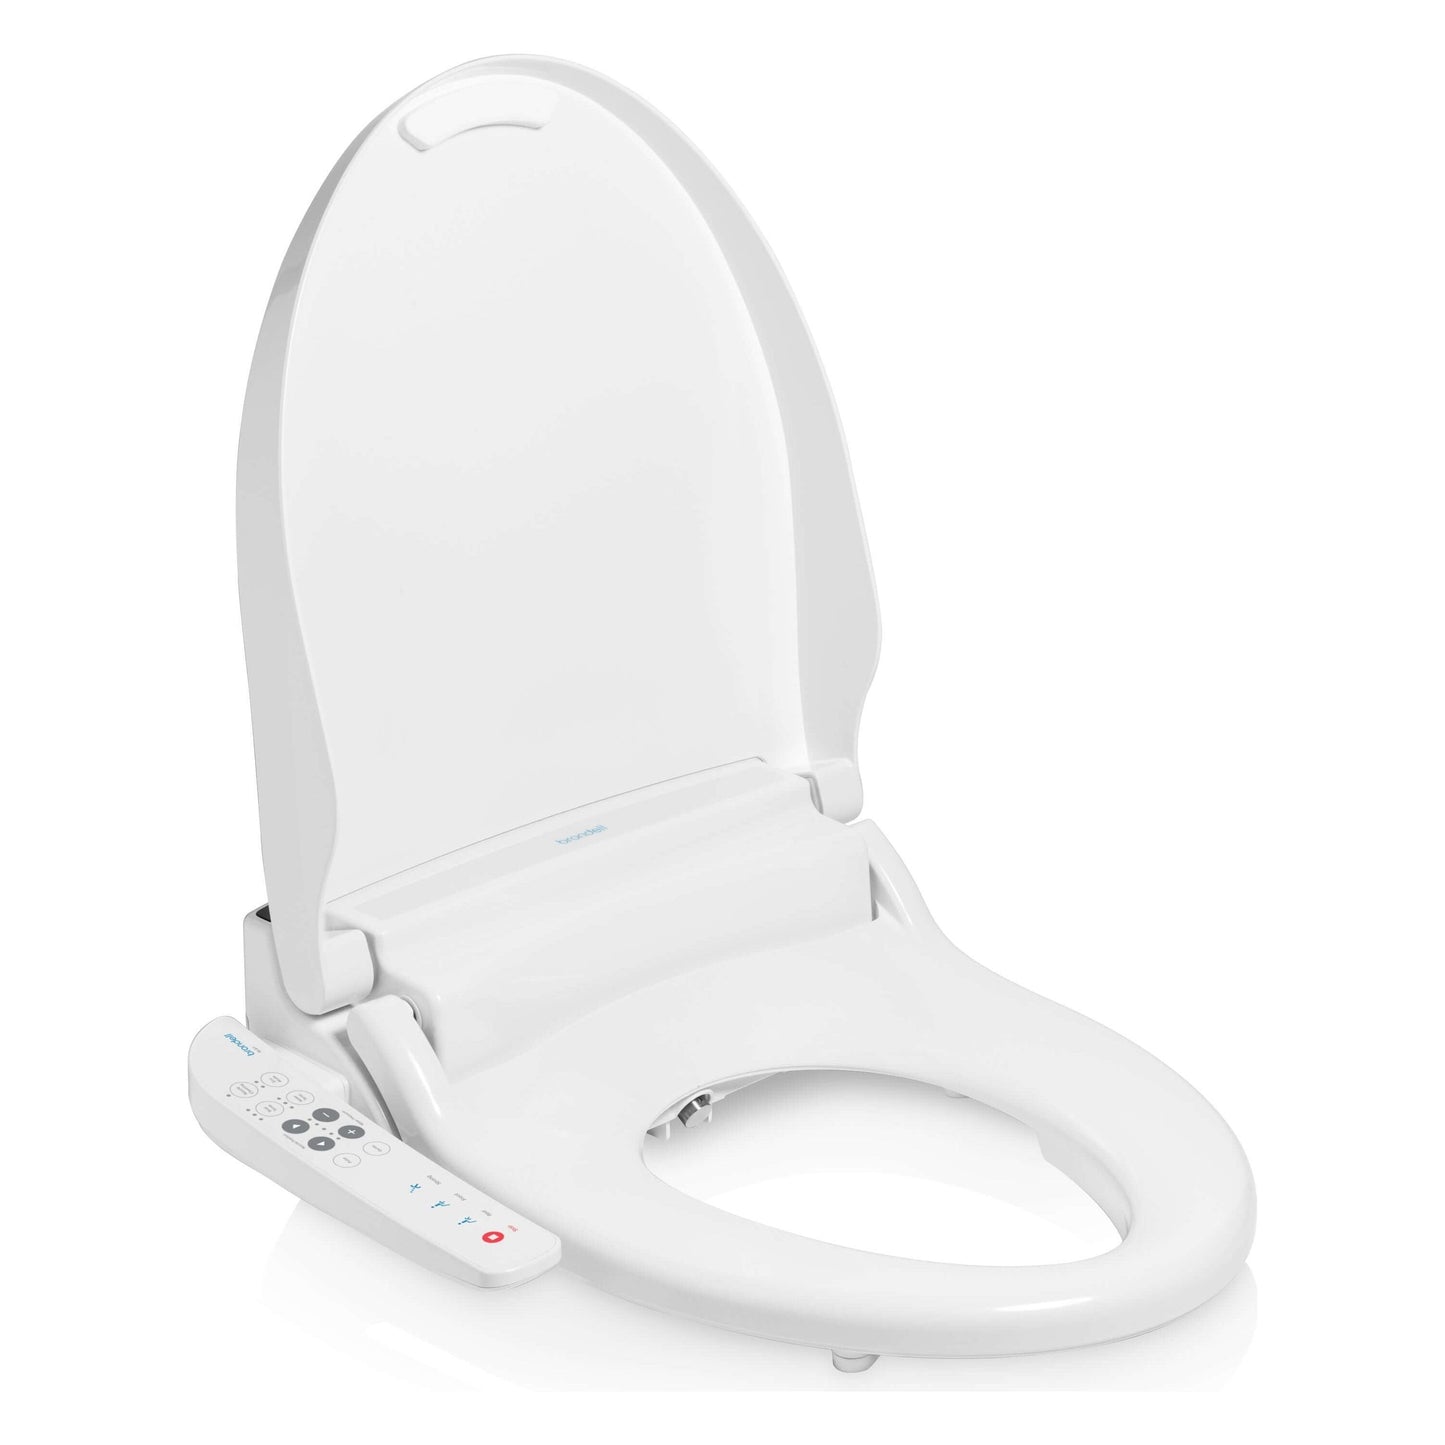 Swash Select BL67 Bidet Seat - alternate side angled view with lid open